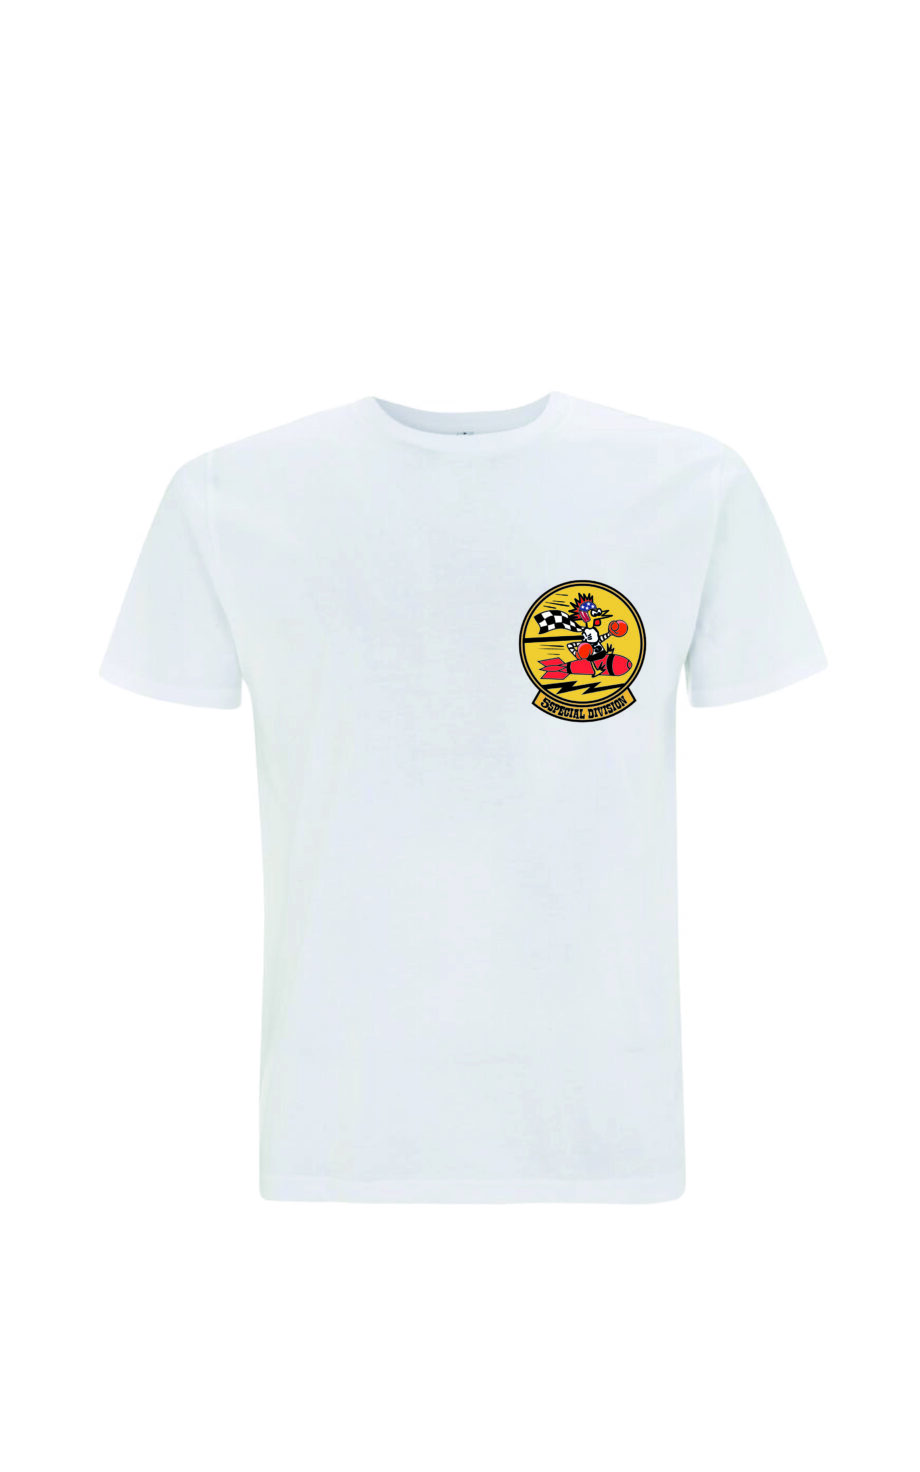 Chicken-squadron-patch-tee-5Special-06